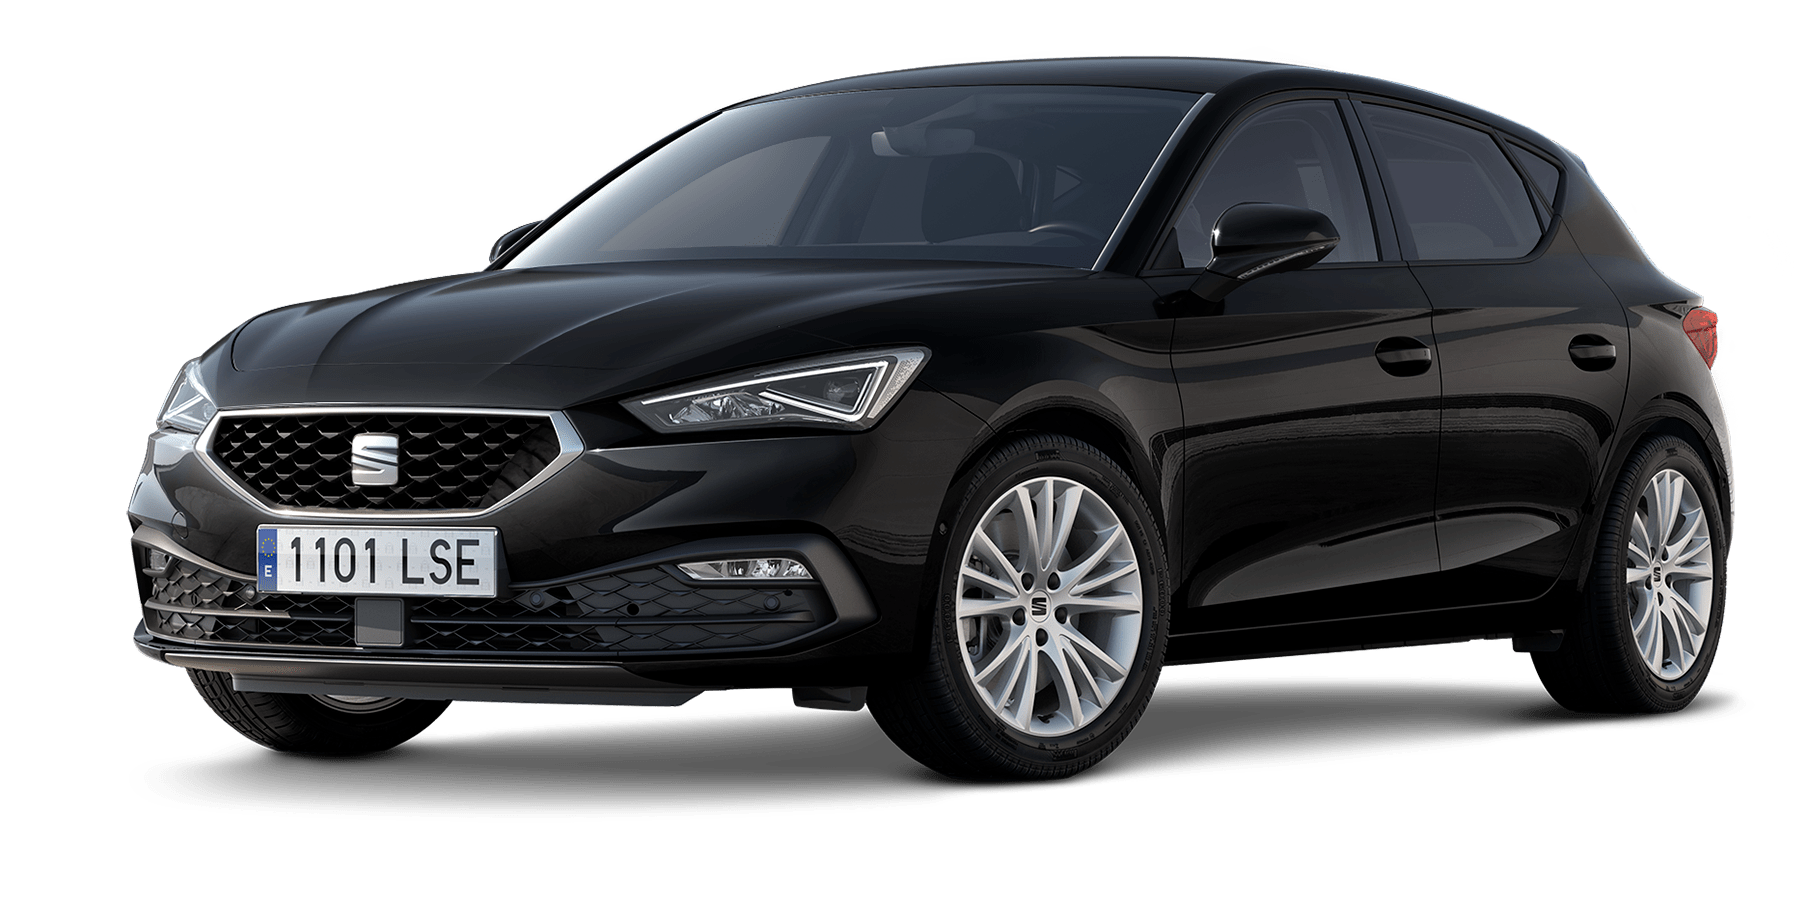 SEAT Leon Style, A safe compact car